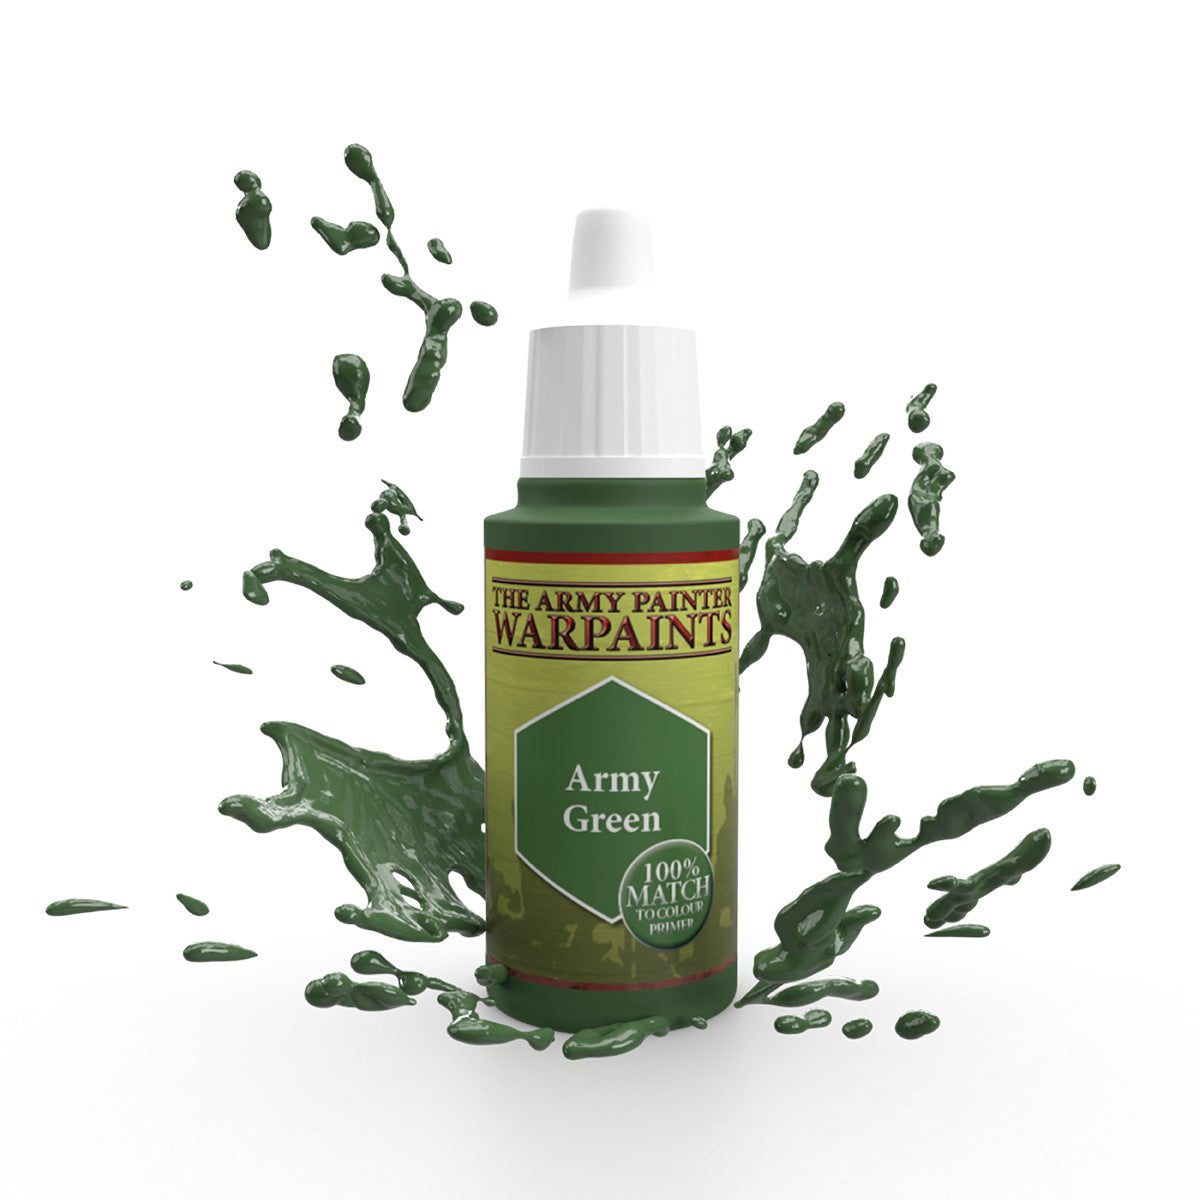 Army Painter Warpaints - Army Green Acrylic Paint 18ml